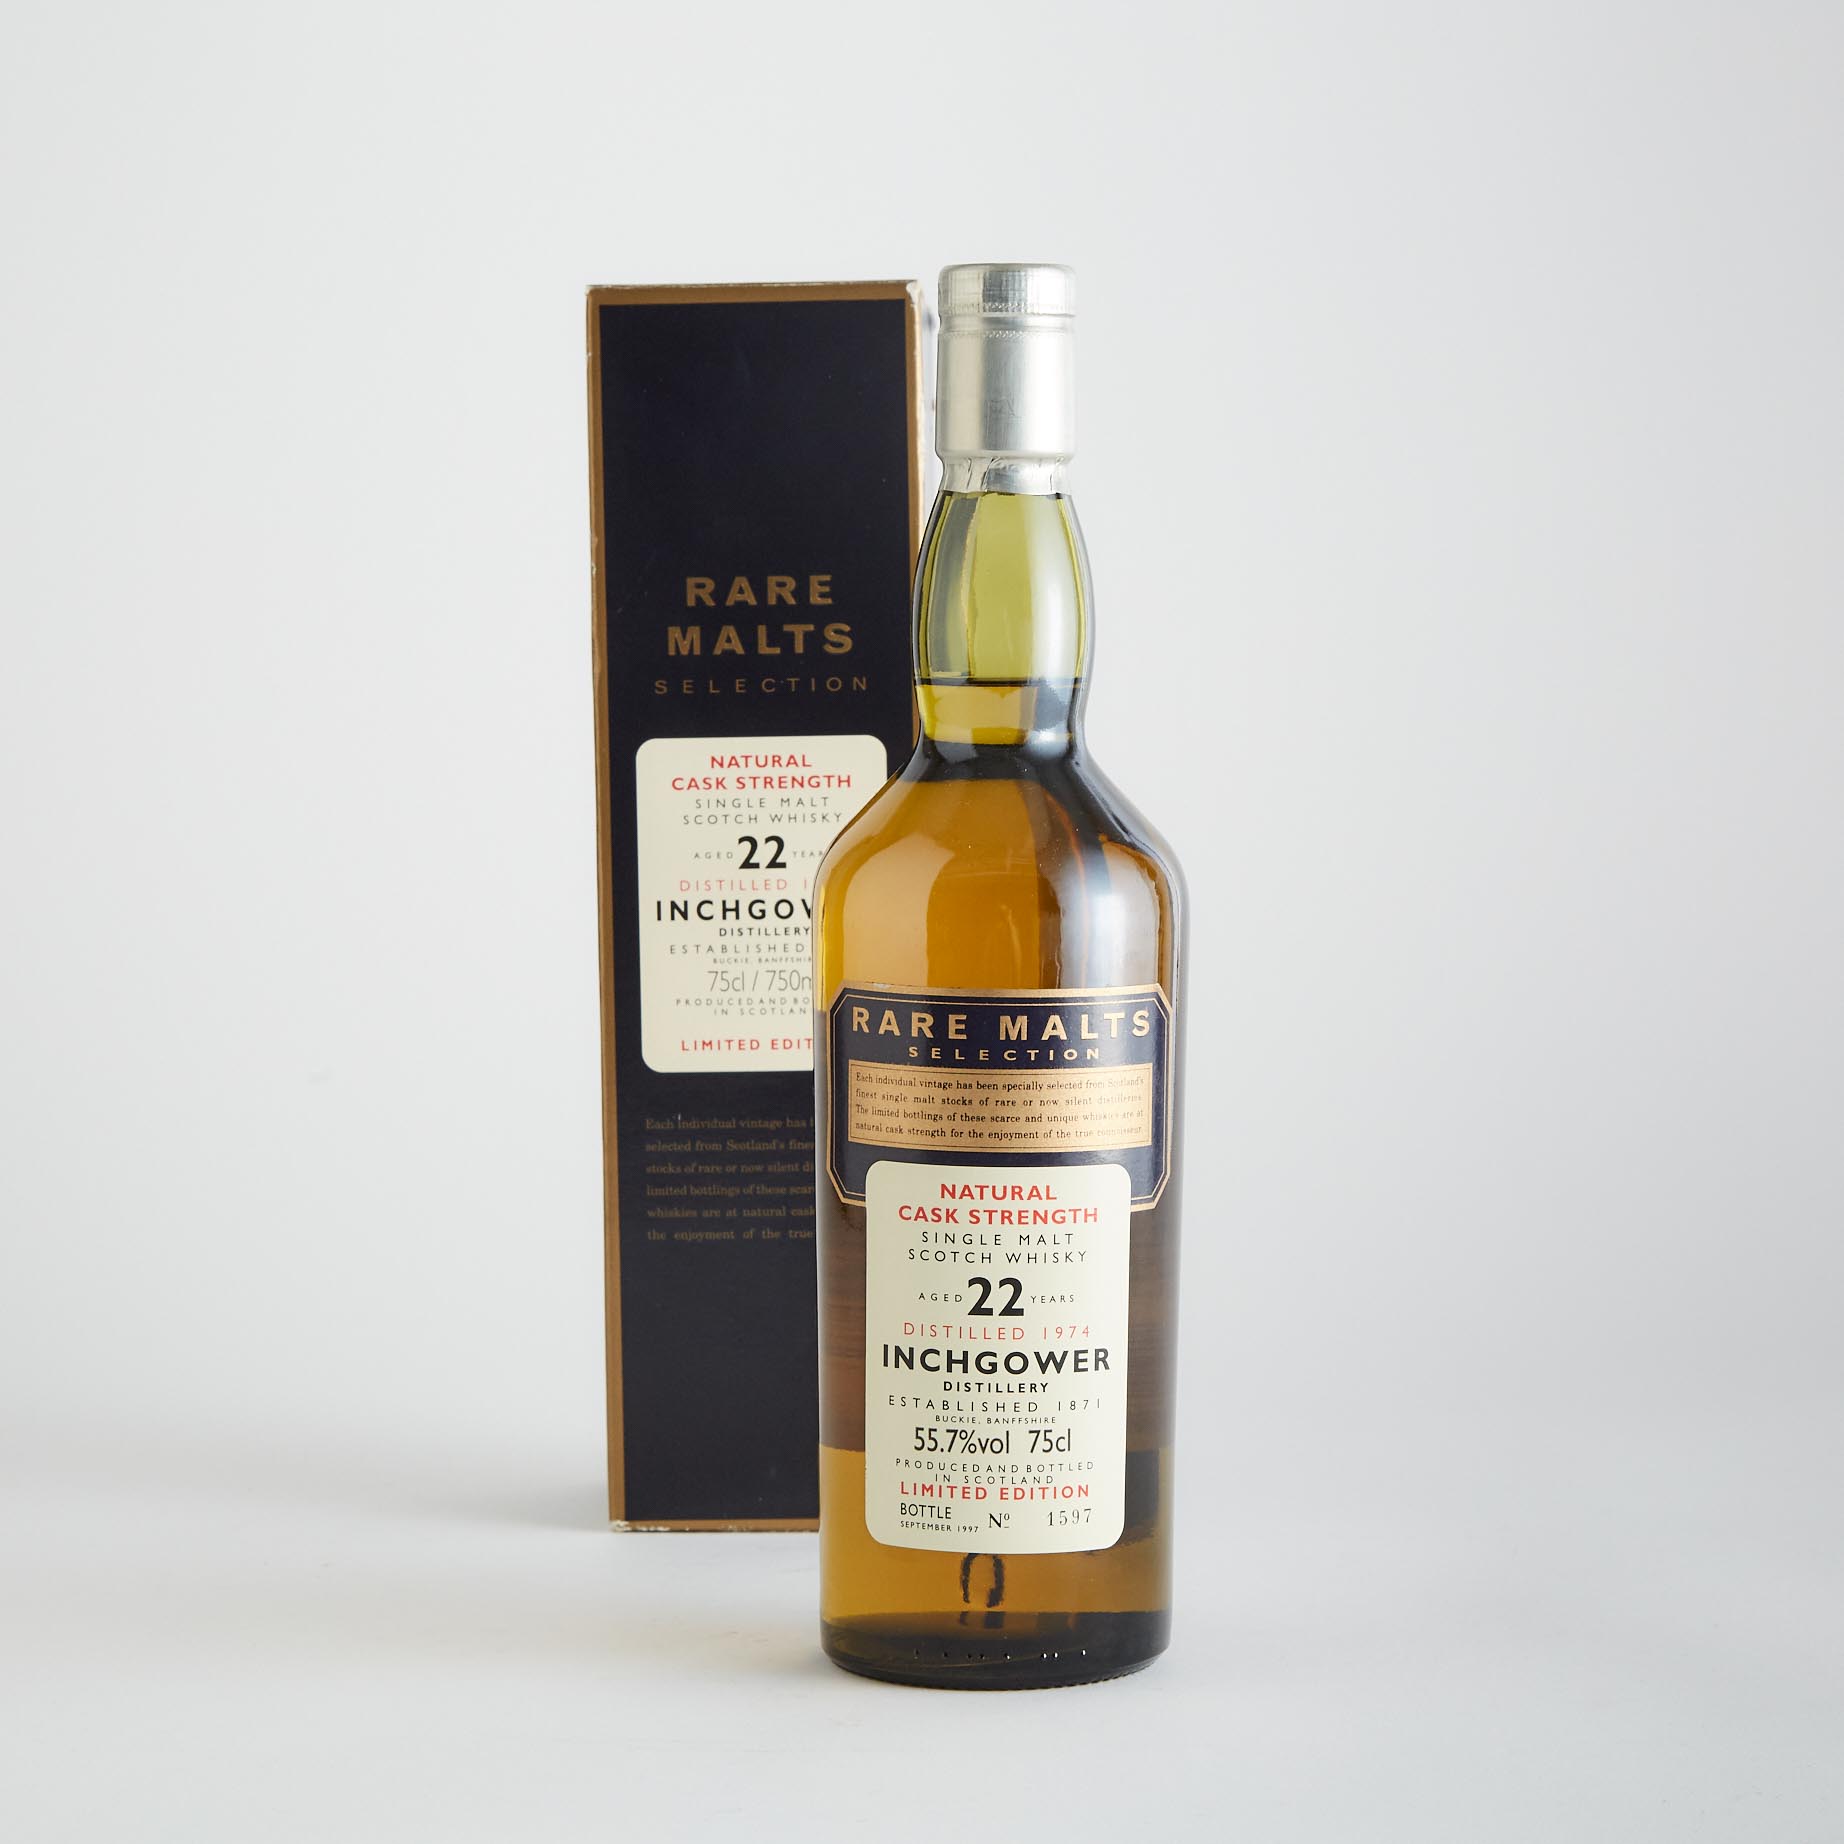 INCHGOWER SINGLE MALT SCOTCH WHISKY 22 YEARS (ONE 75 CL)